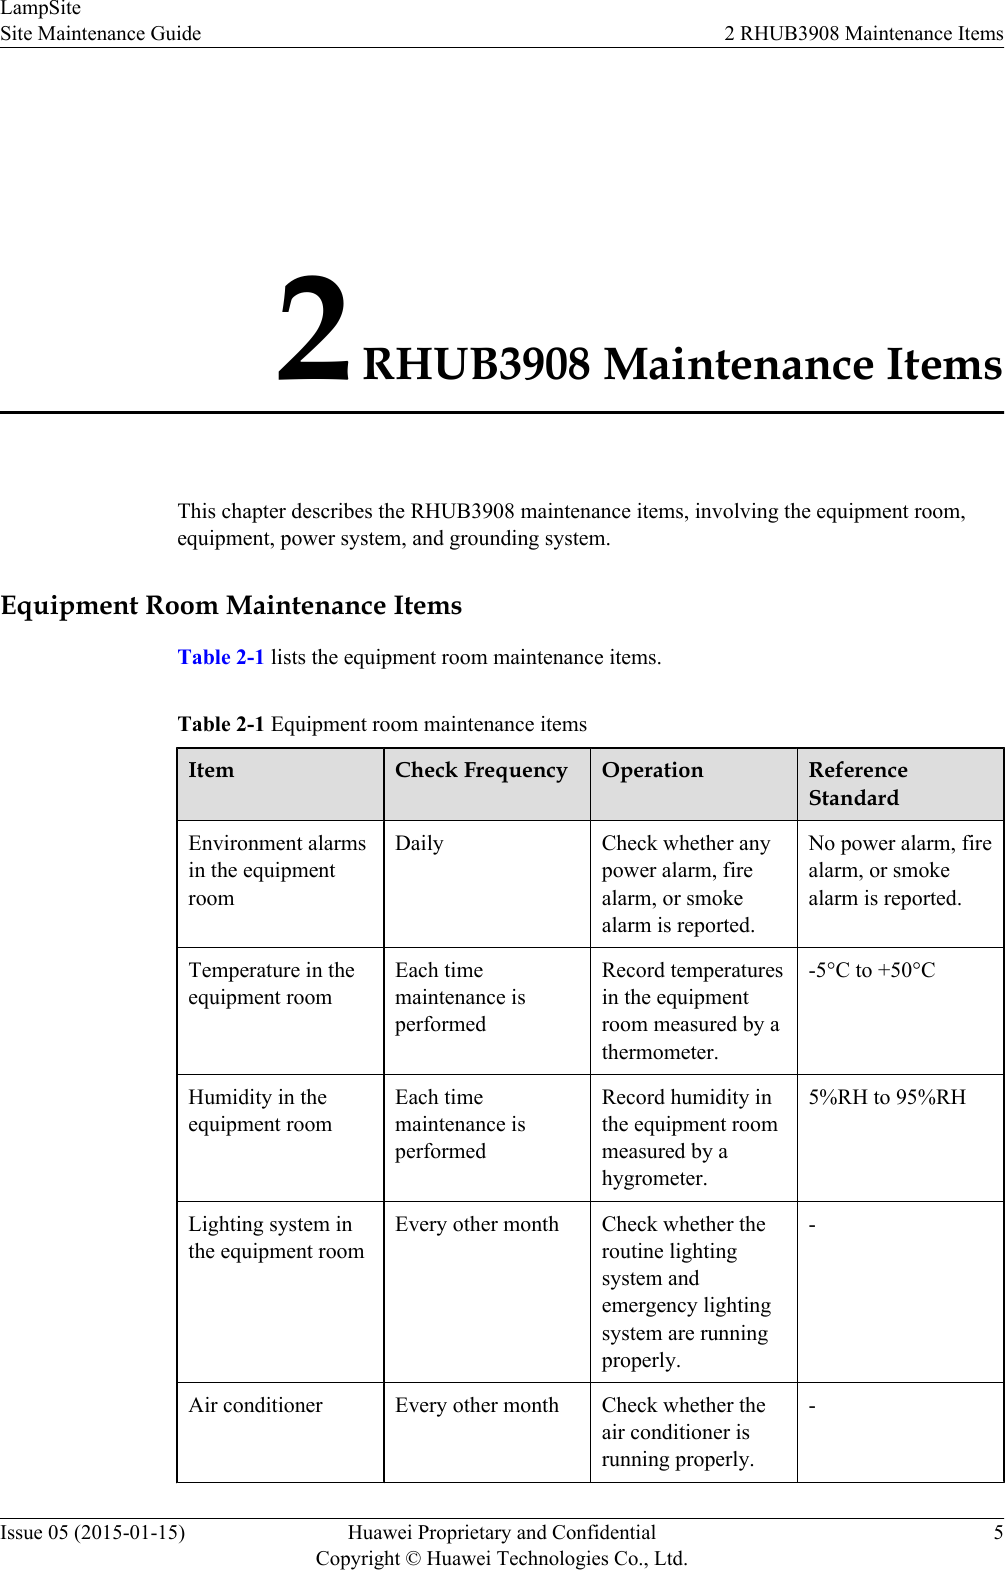 2 RHUB3908 Maintenance ItemsThis chapter describes the RHUB3908 maintenance items, involving the equipment room,equipment, power system, and grounding system.Equipment Room Maintenance ItemsTable 2-1 lists the equipment room maintenance items.Table 2-1 Equipment room maintenance itemsItem Check Frequency Operation ReferenceStandardEnvironment alarmsin the equipmentroomDaily Check whether anypower alarm, firealarm, or smokealarm is reported.No power alarm, firealarm, or smokealarm is reported.Temperature in theequipment roomEach timemaintenance isperformedRecord temperaturesin the equipmentroom measured by athermometer.-5°C to +50°CHumidity in theequipment roomEach timemaintenance isperformedRecord humidity inthe equipment roommeasured by ahygrometer.5%RH to 95%RHLighting system inthe equipment roomEvery other month Check whether theroutine lightingsystem andemergency lightingsystem are runningproperly.-Air conditioner Every other month Check whether theair conditioner isrunning properly.-LampSiteSite Maintenance Guide 2 RHUB3908 Maintenance ItemsIssue 05 (2015-01-15) Huawei Proprietary and ConfidentialCopyright © Huawei Technologies Co., Ltd.5